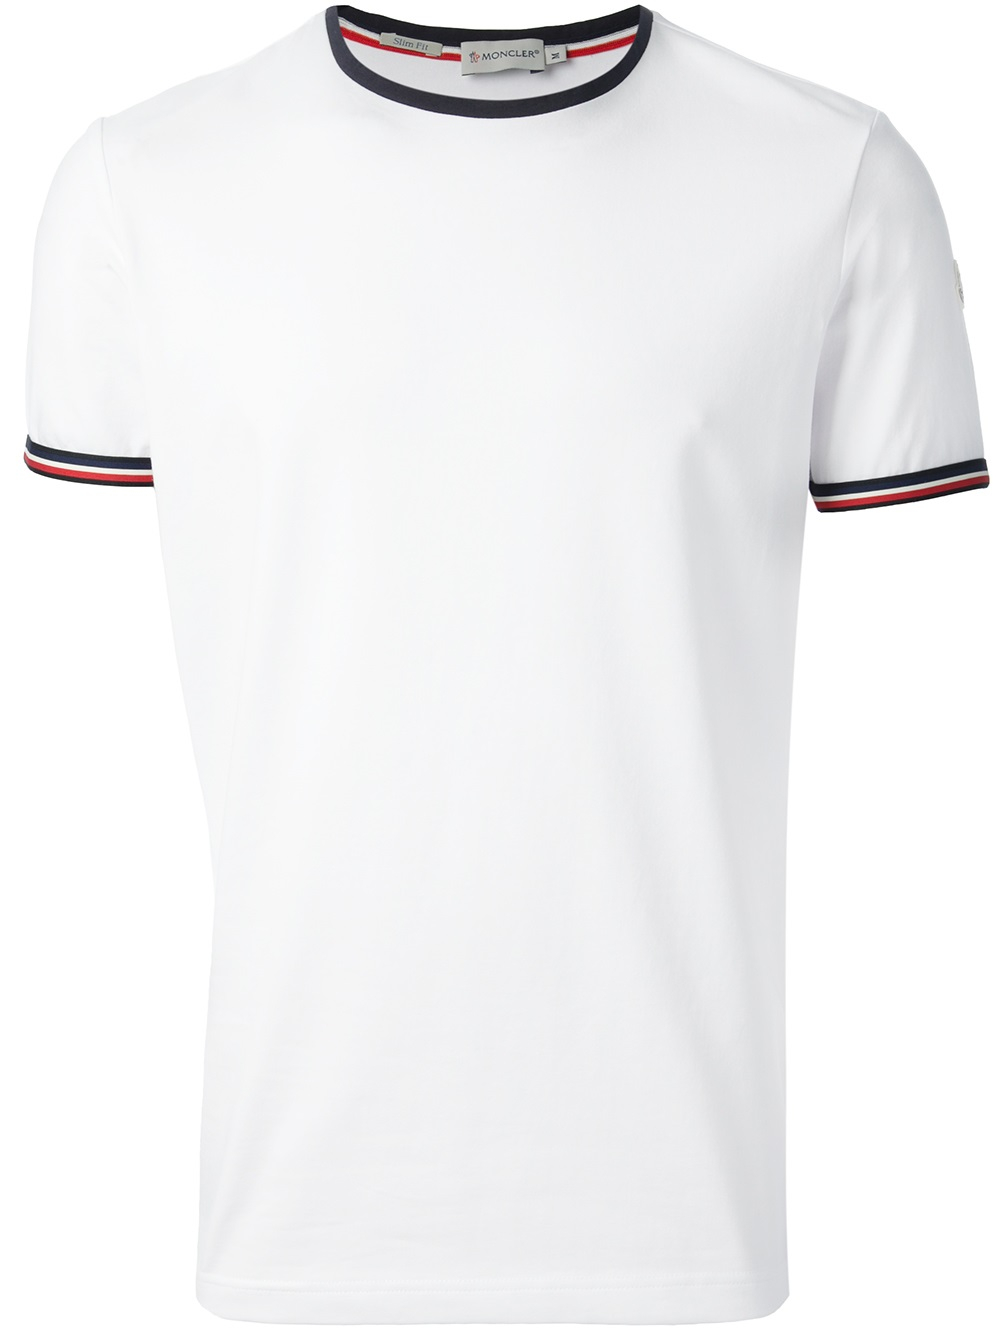 Moncler Classic T-Shirt in White for Men - Lyst